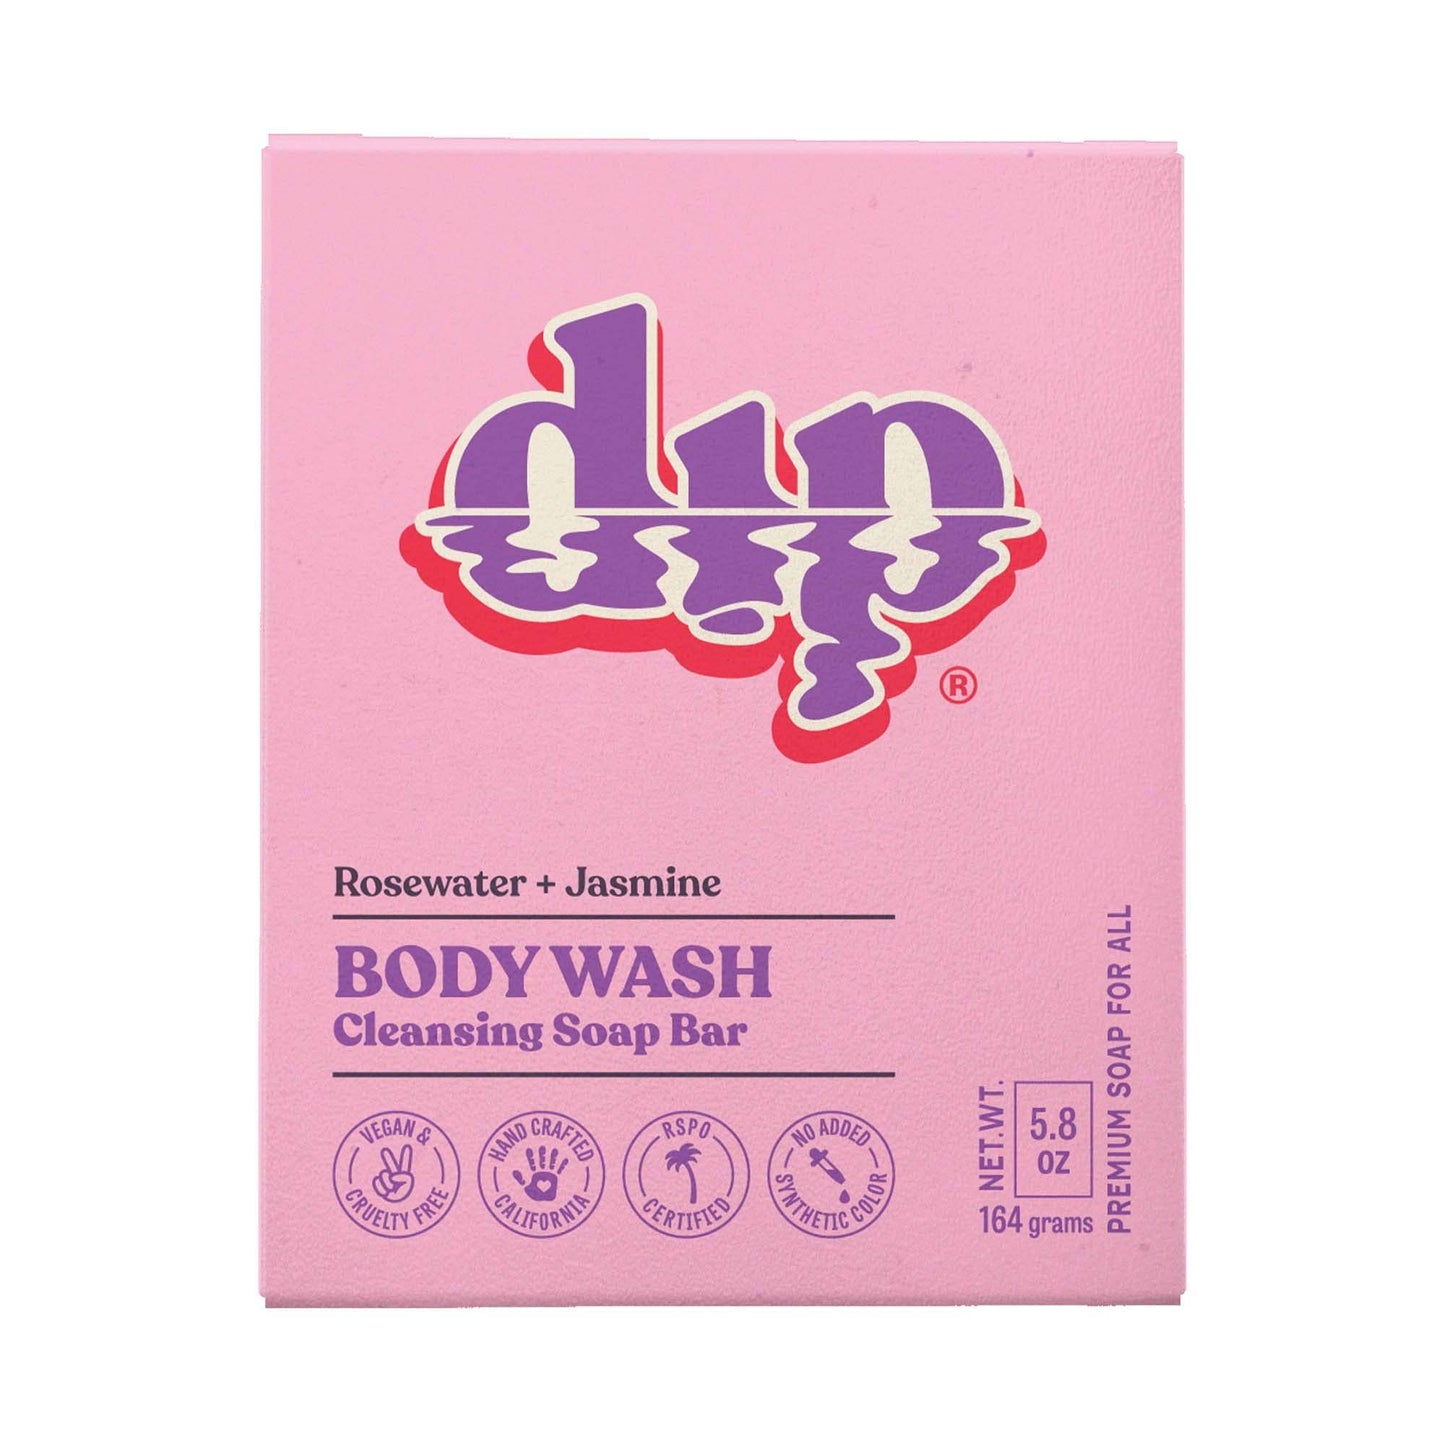 Body Wash Cleansing Soap Bar - Rosewater & Jasmine